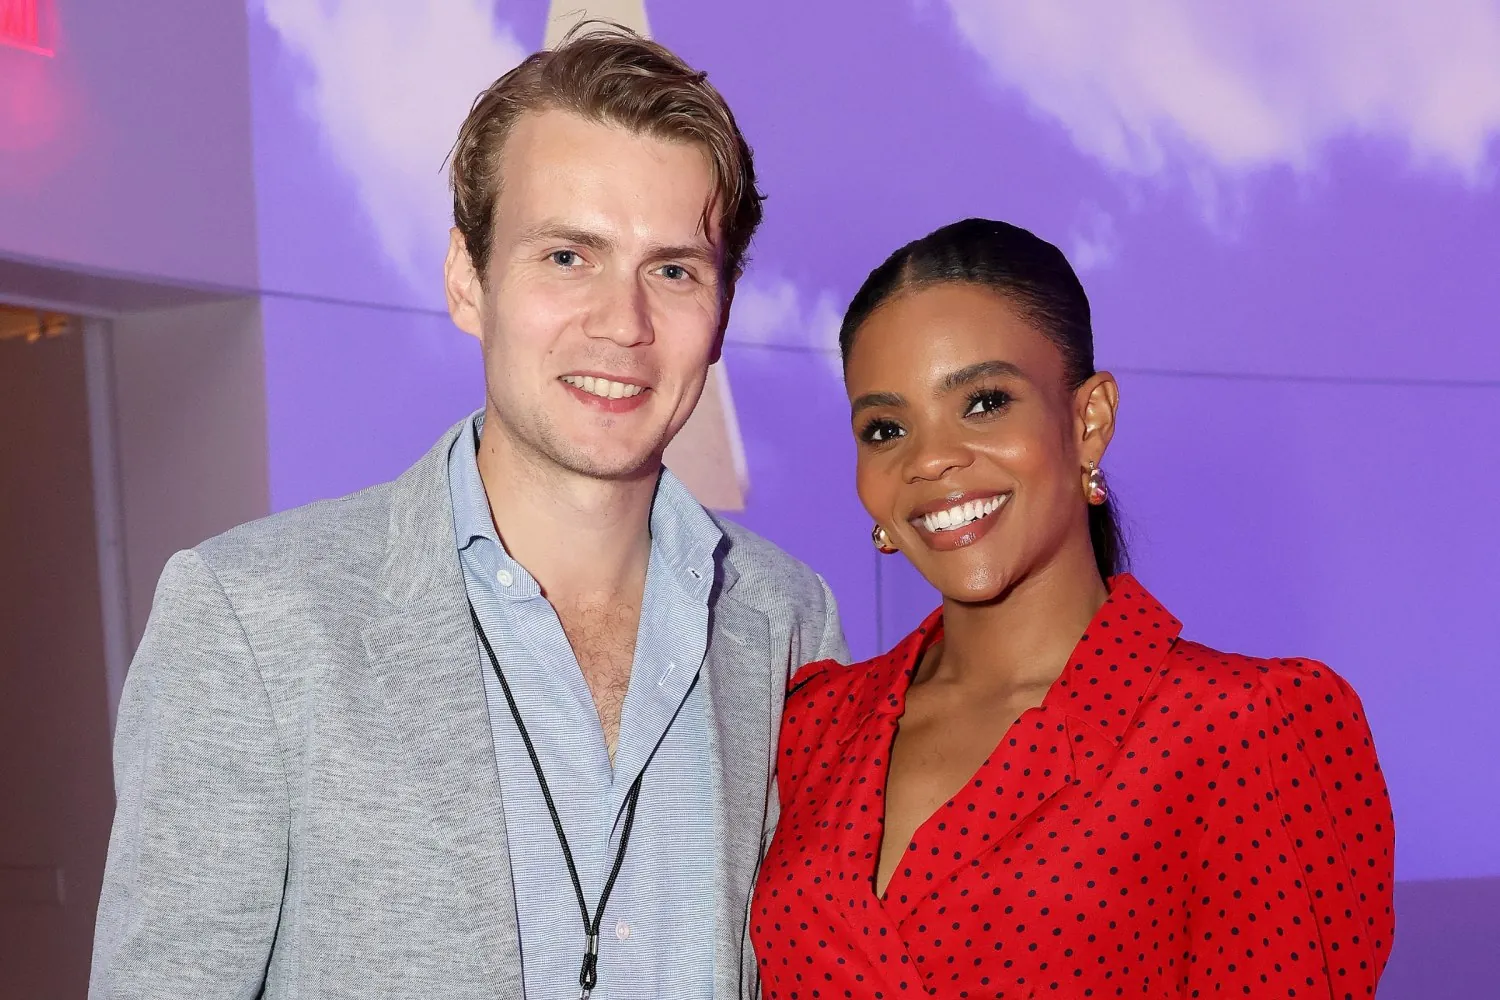 Candace Owens and george farmer